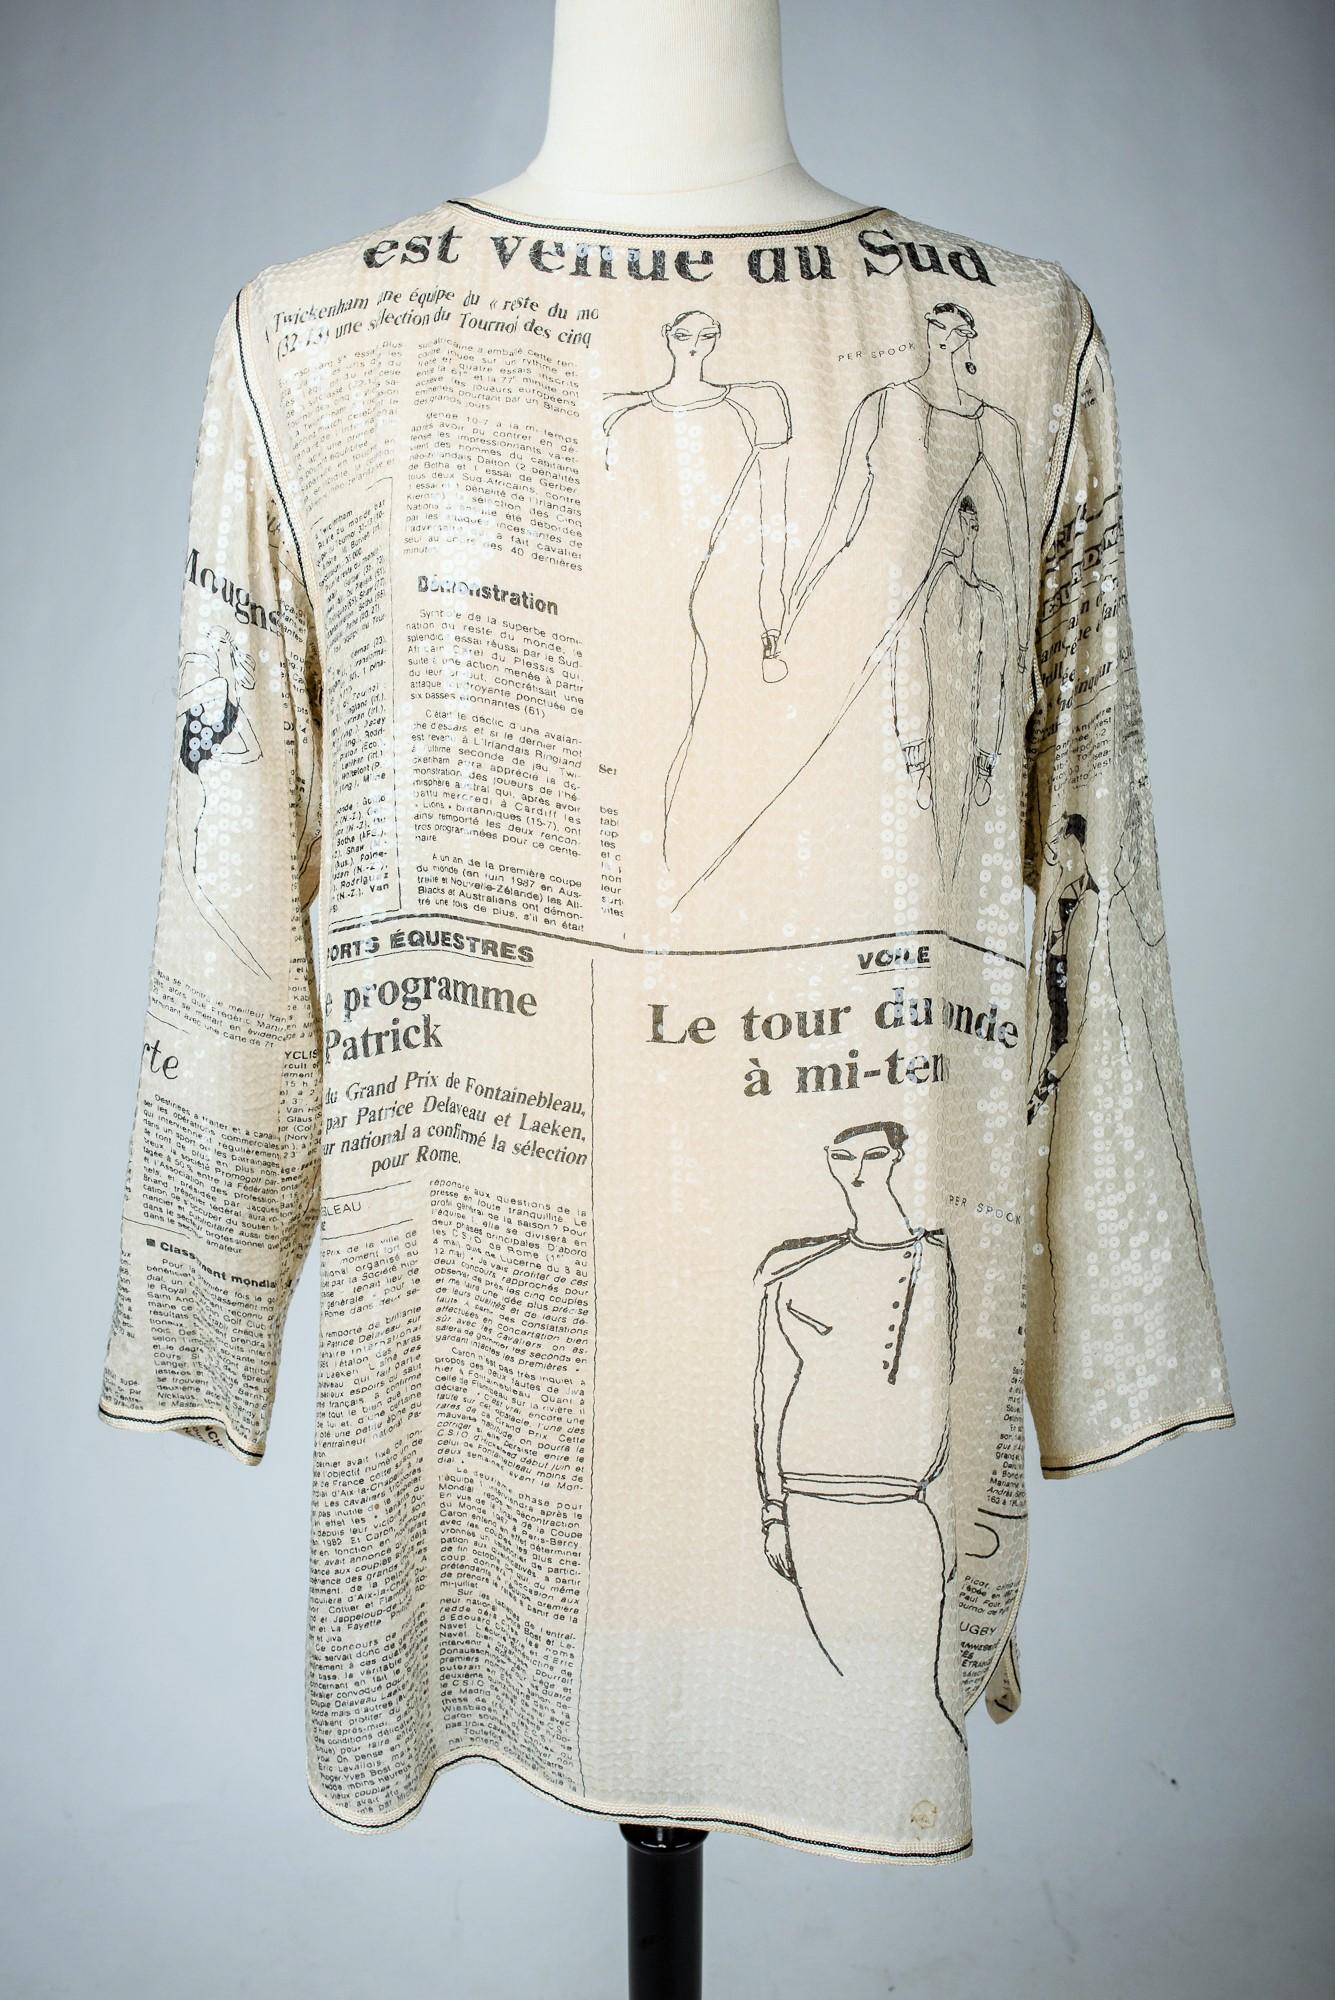 Fall-Winter 1987-1988 Collection

France

Iconic embroidered tunic dress with translucent pearls by Per Spook, Fall-Winter 1986-1987 collection, no label but workshop bolduc 44 NB H 86,87, model n°66. From the wardrobe of Jeanne Moreau, famous